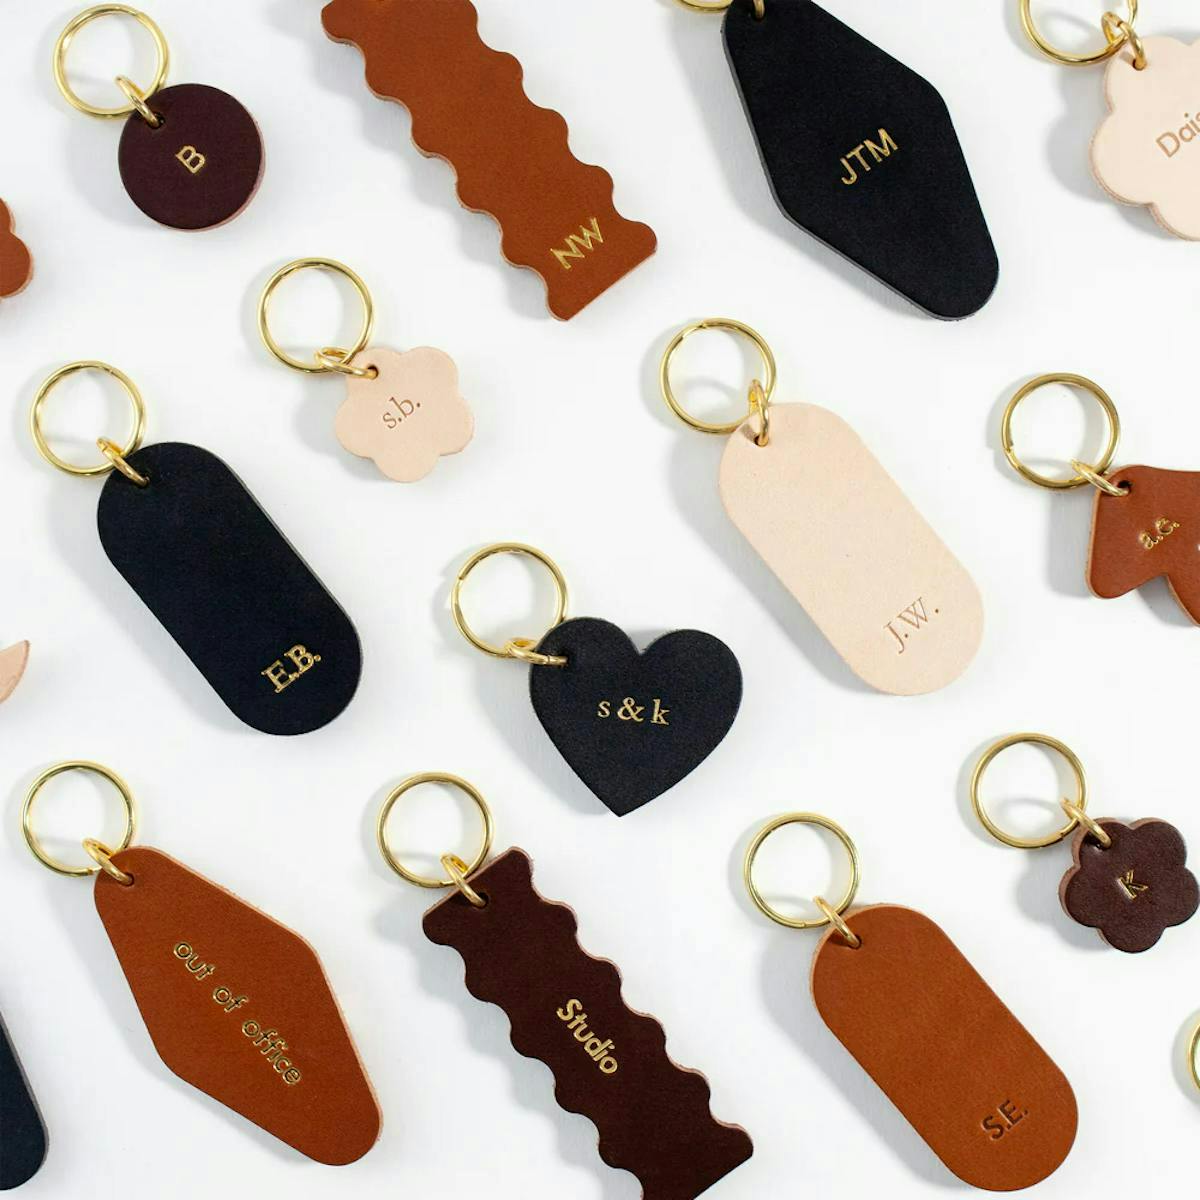 Personalized leather key tag gift